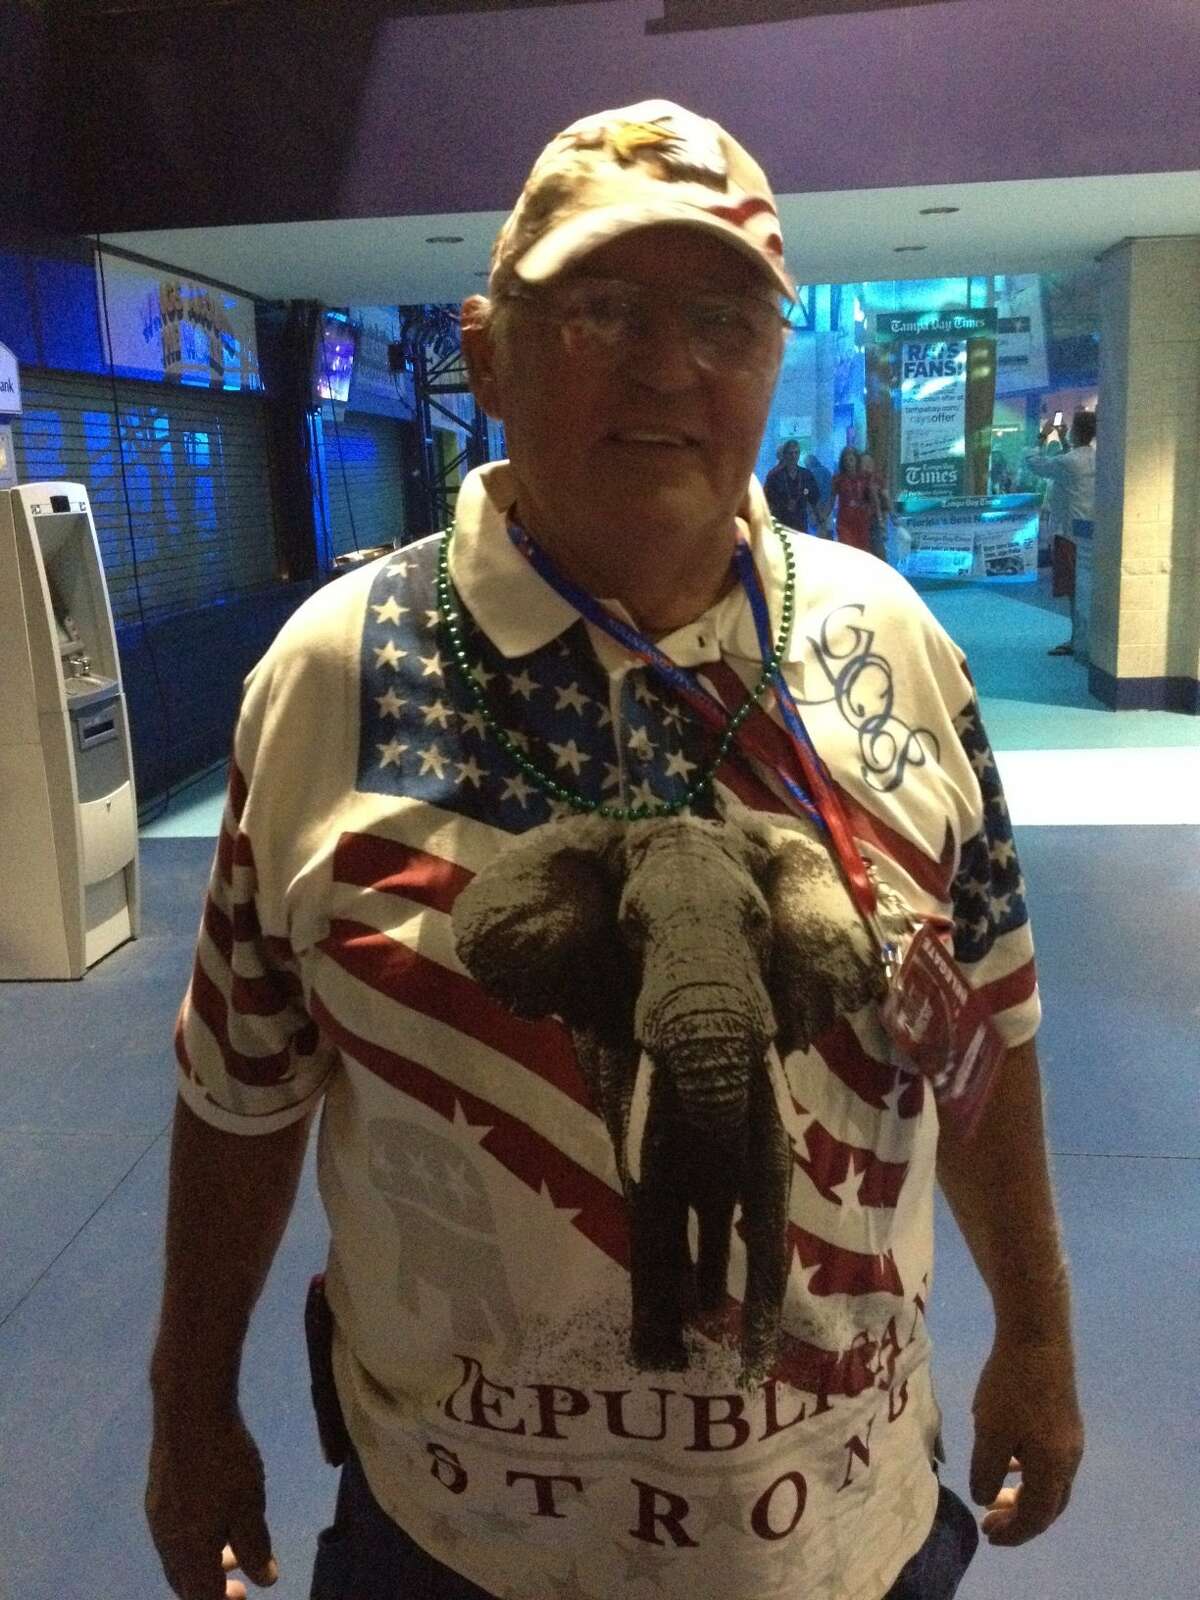 Lee Anderson of McAlester, Okla., is fashionably dressed for the big party.